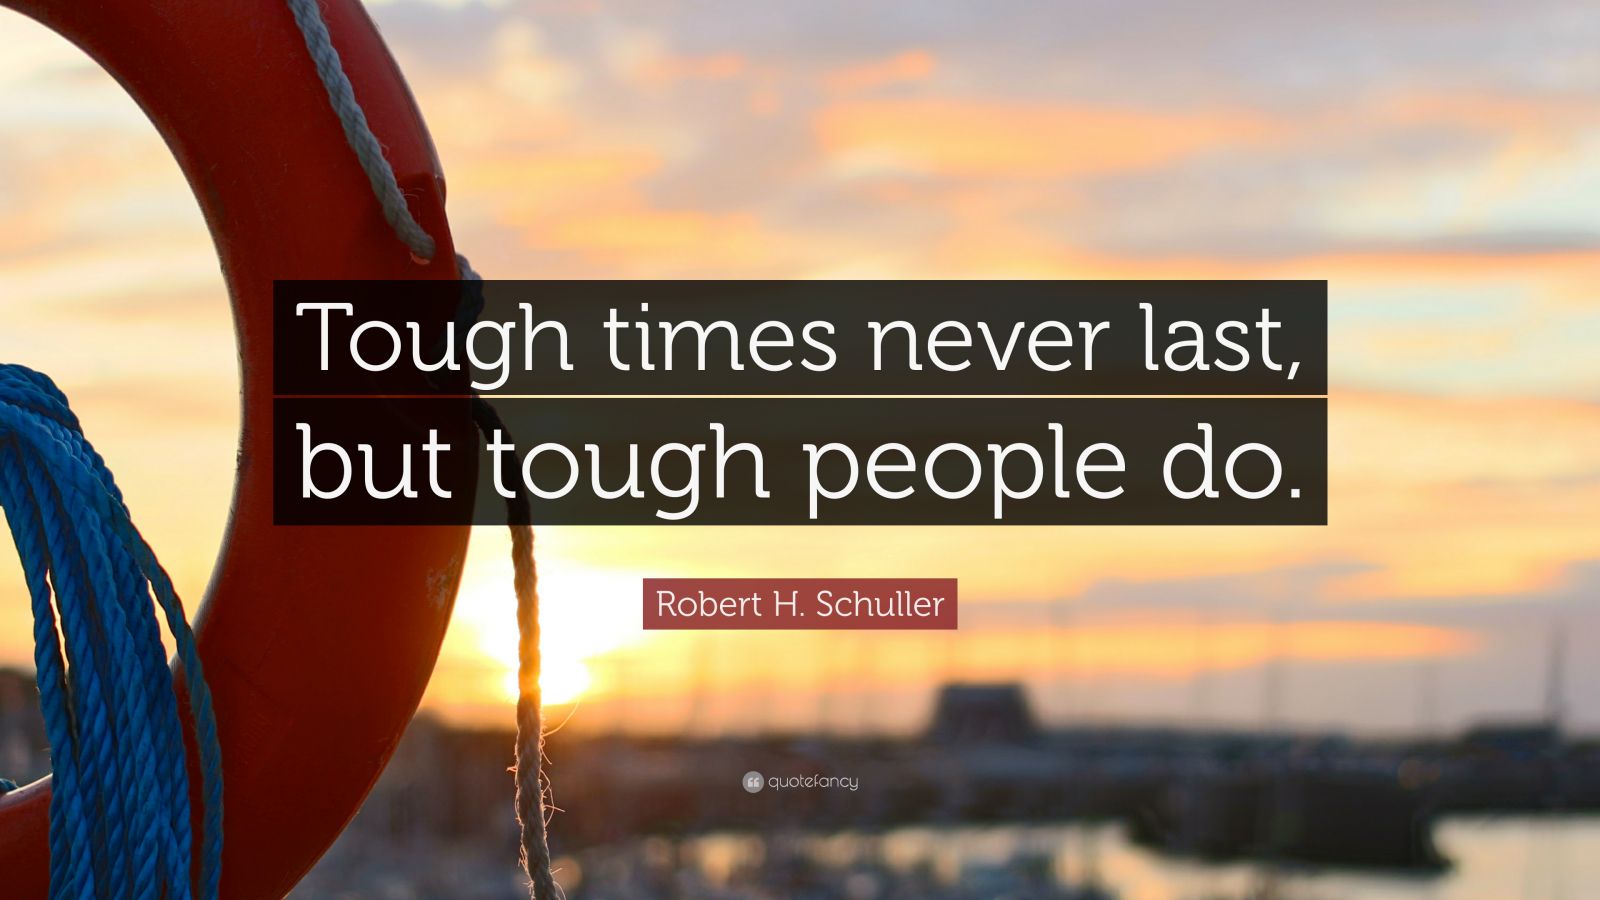 Robert H Schuller Quote “tough Times Never Last But Tough People Do ” 12 Wallpapers